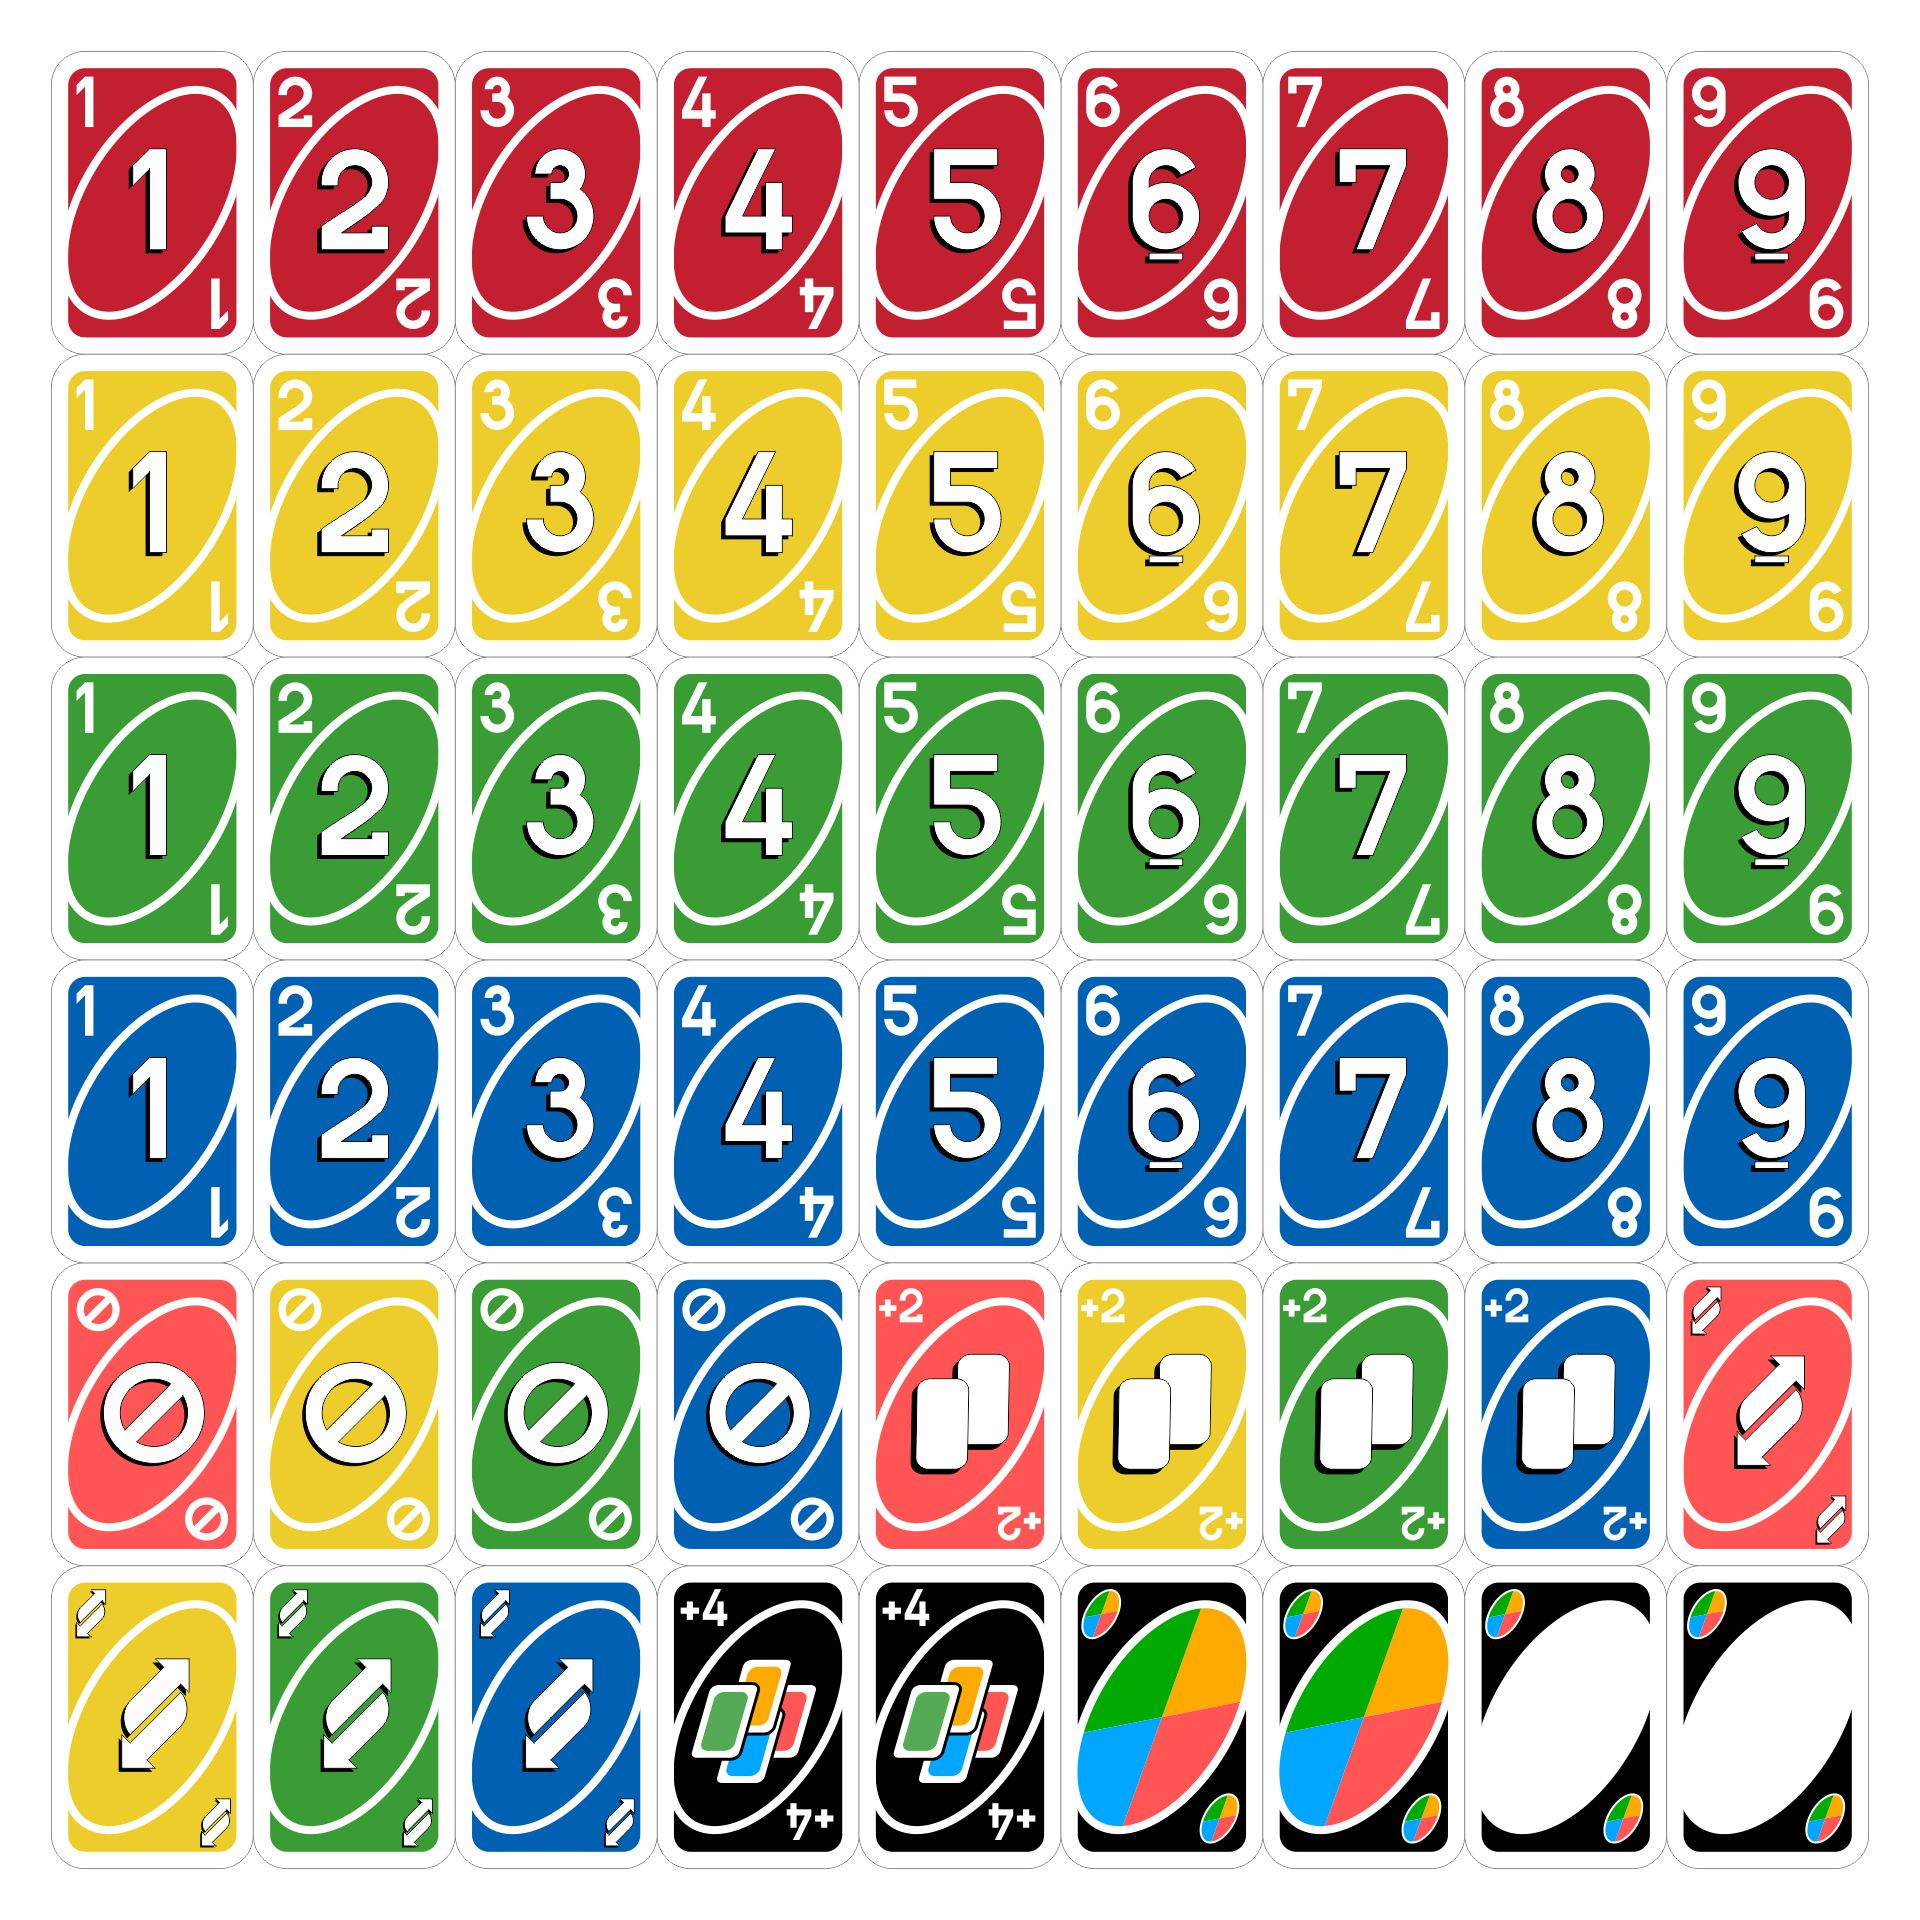 Pdf printable uno cards, hd png download is pure and creative png image upl...